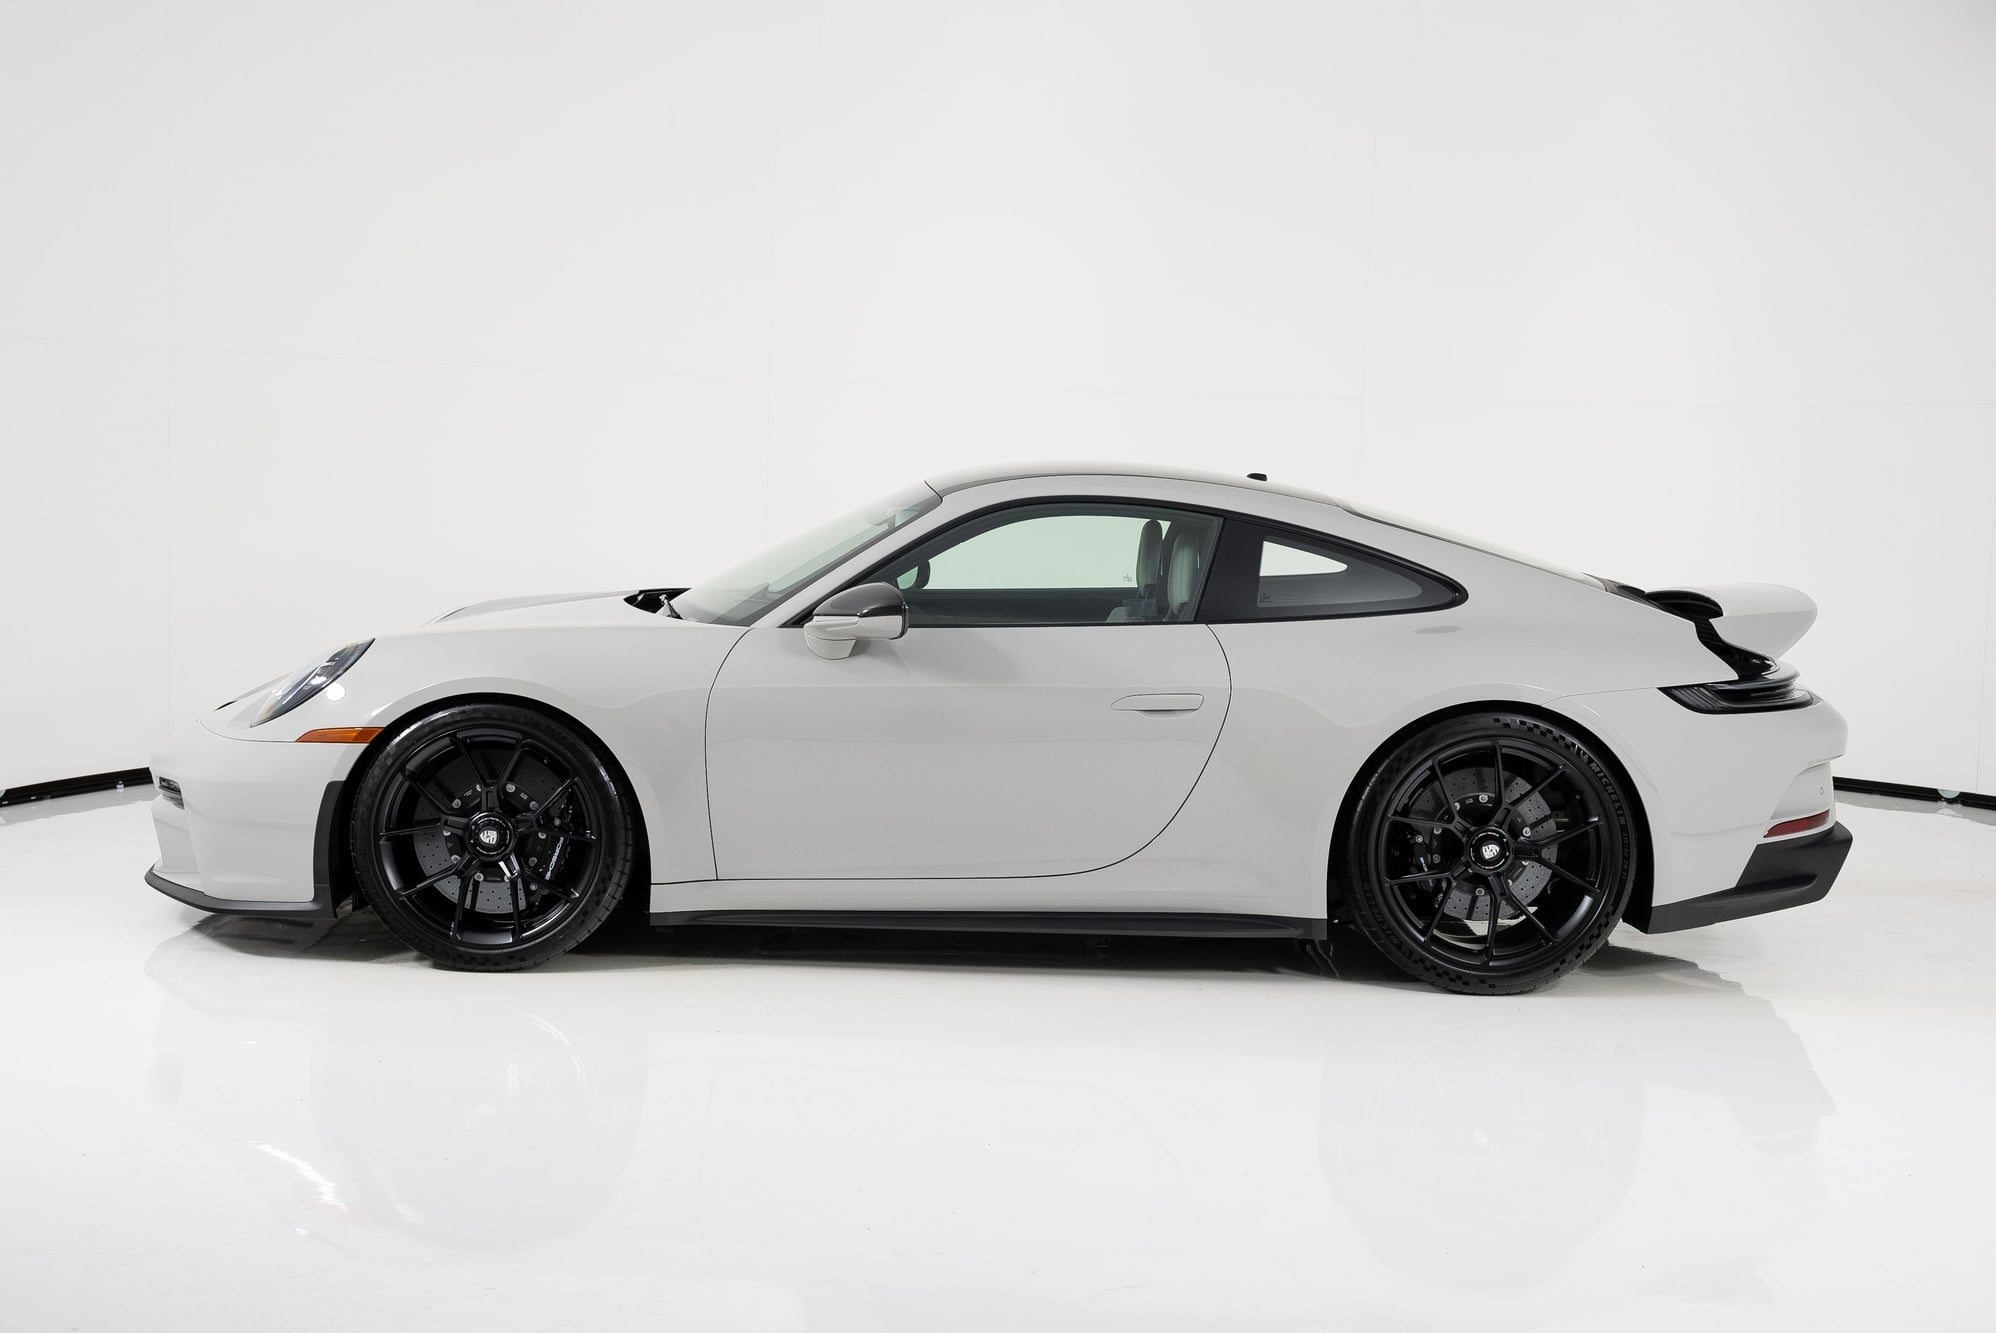 2023 Porsche 911 - CHALK 992 GT3 TOURING - Used - VIN WP0AC2A97PS270247 - 45 Miles - 6 cyl - 2WD - Manual - Coupe - Gray - Murrieta, CA 92562, United States